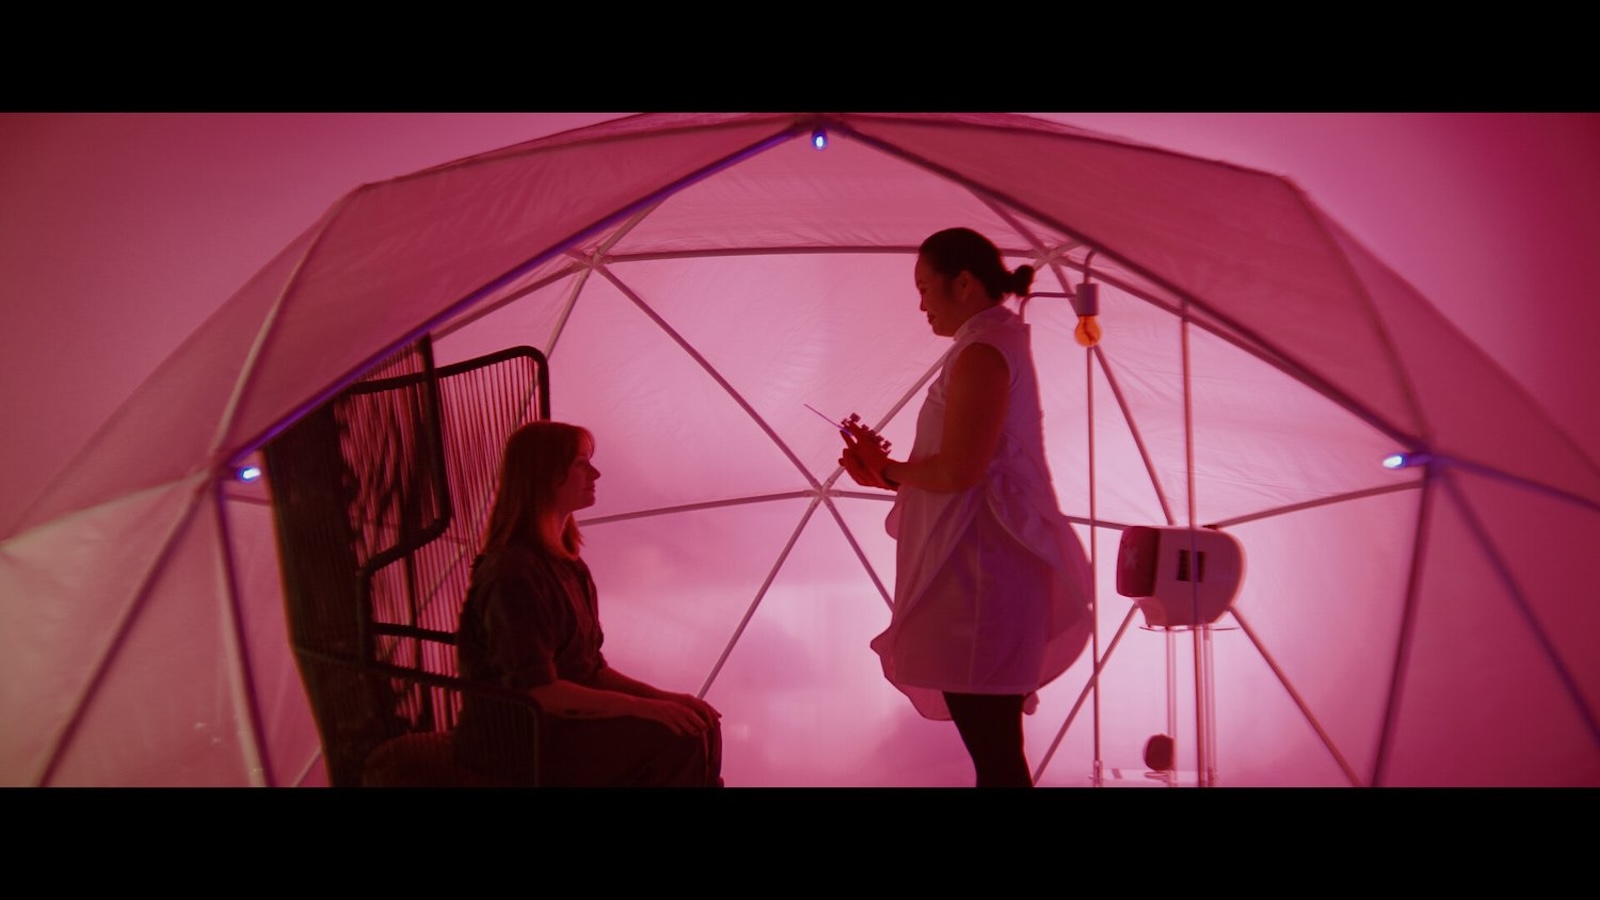 A woman holding a large needle stands over another woman, both under a large pink tent